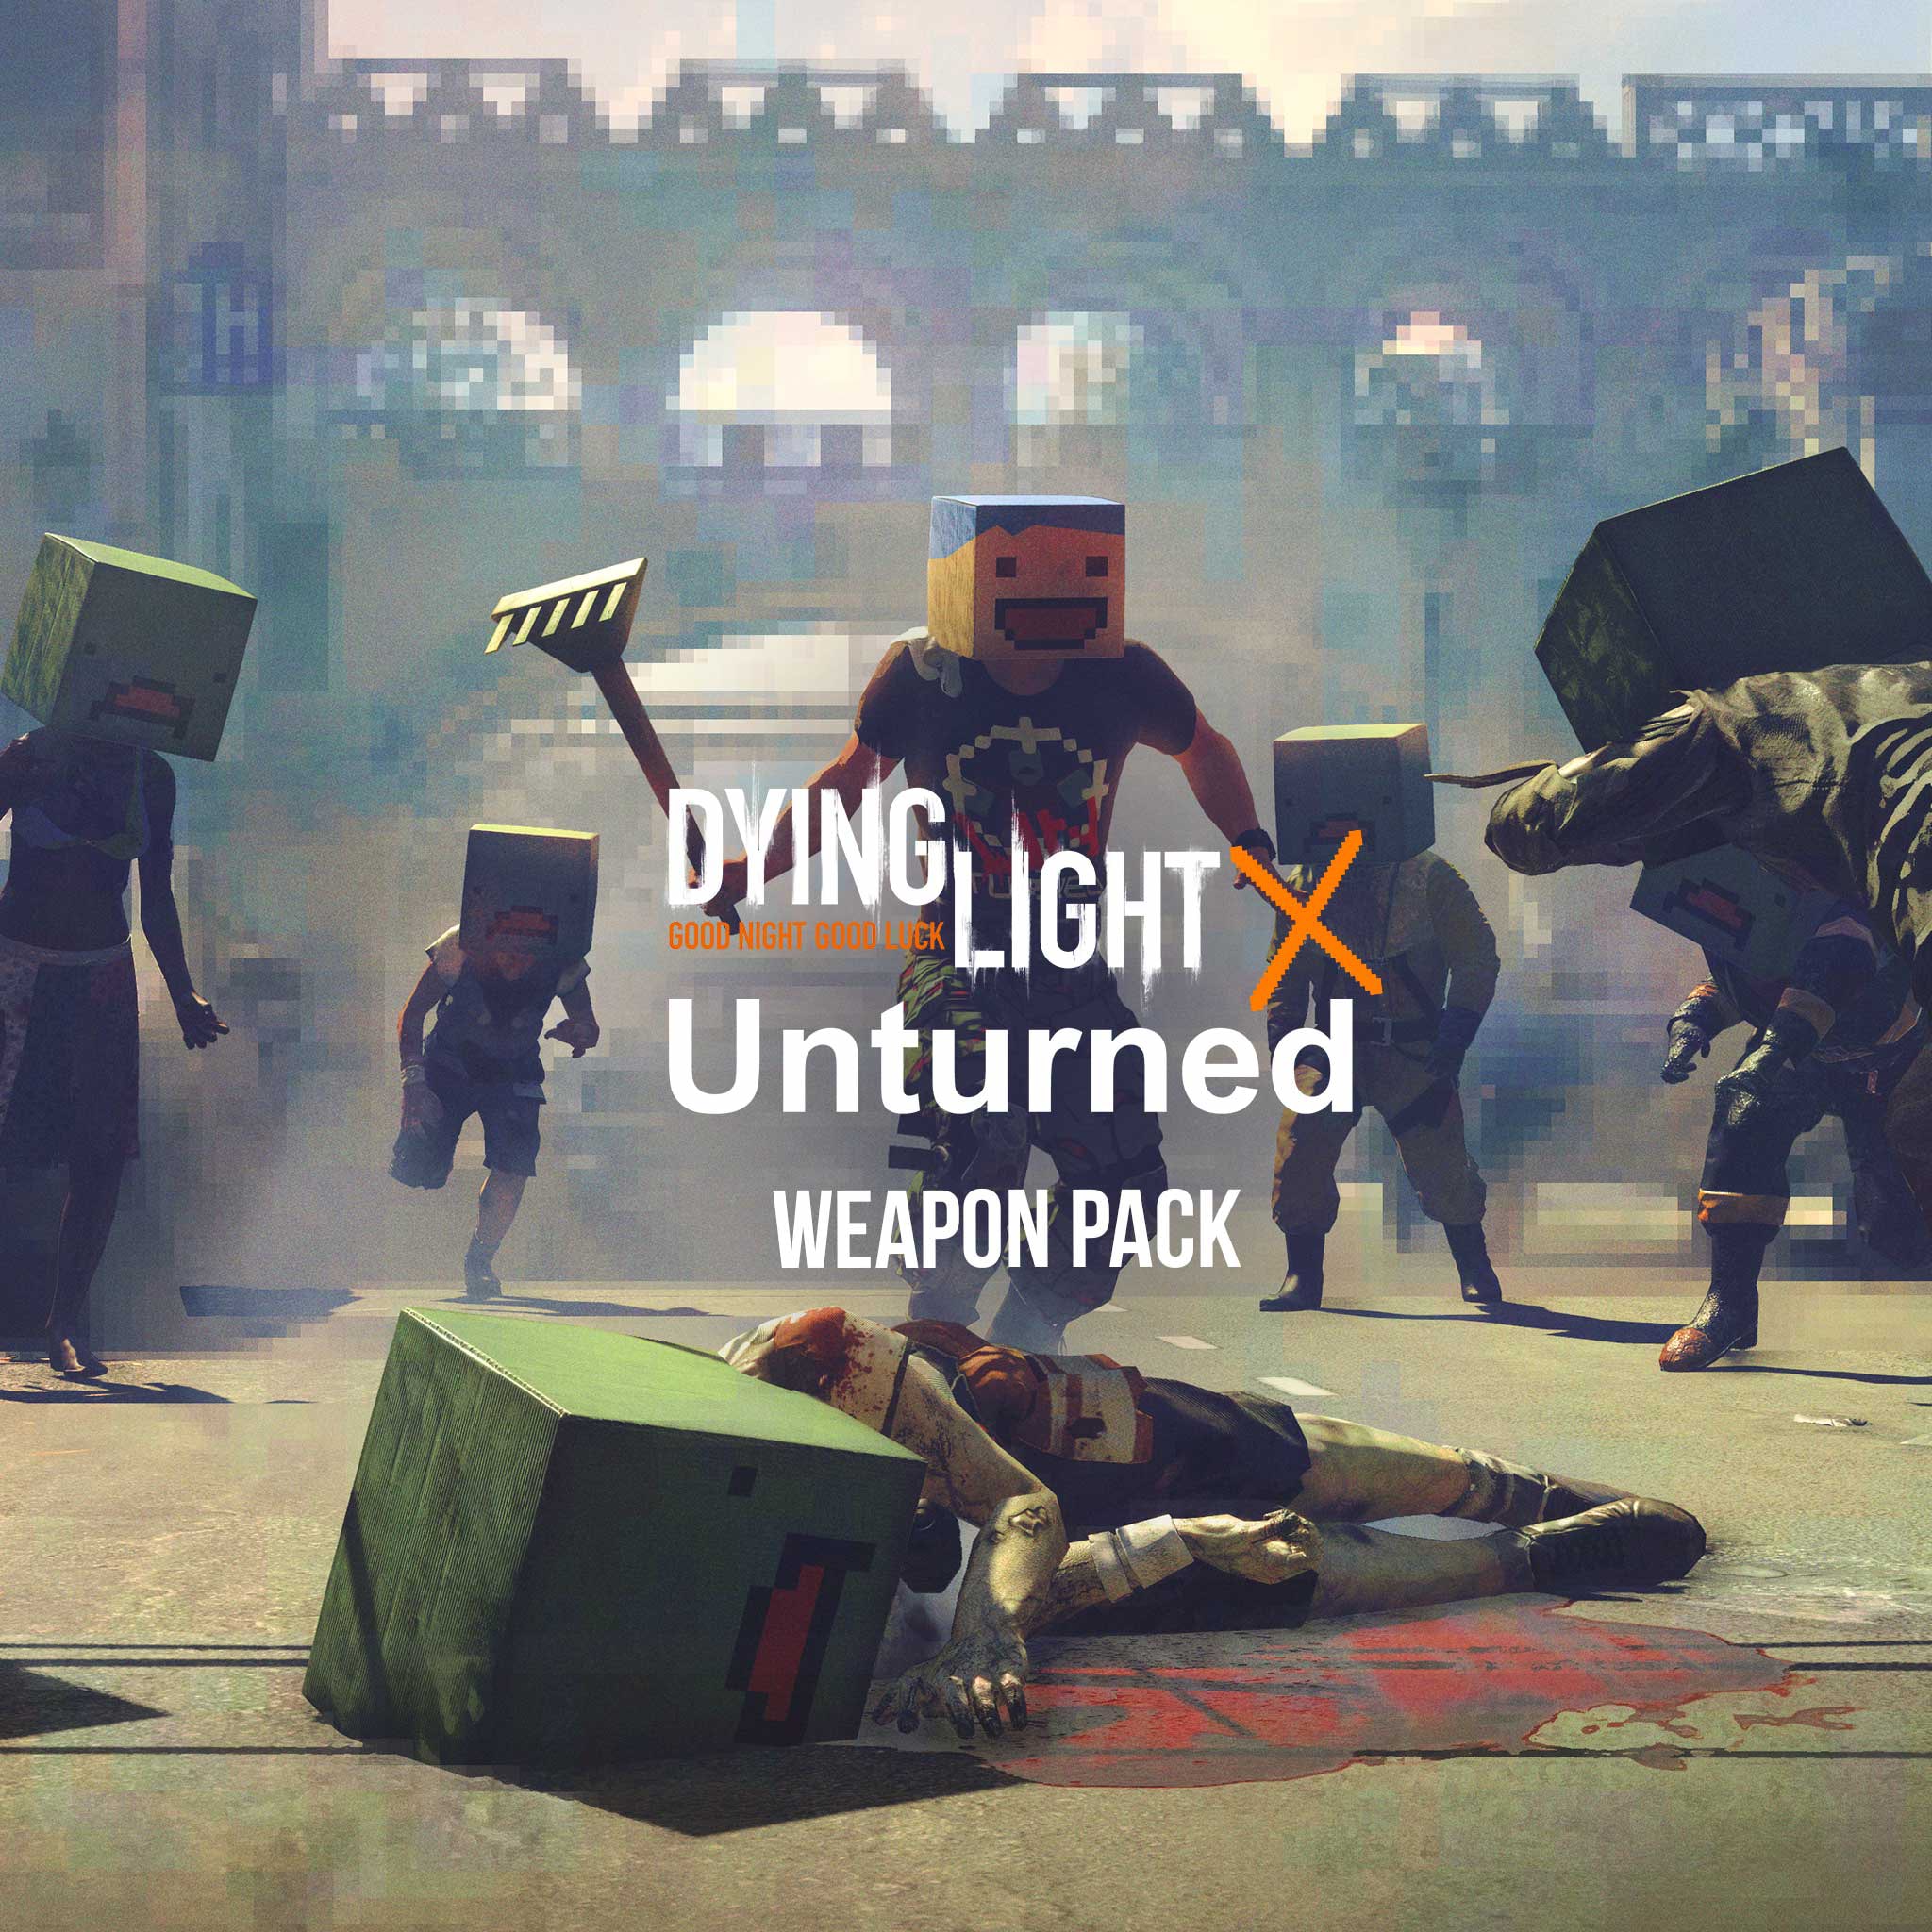 Dying Light – Unturned Weapon Pack